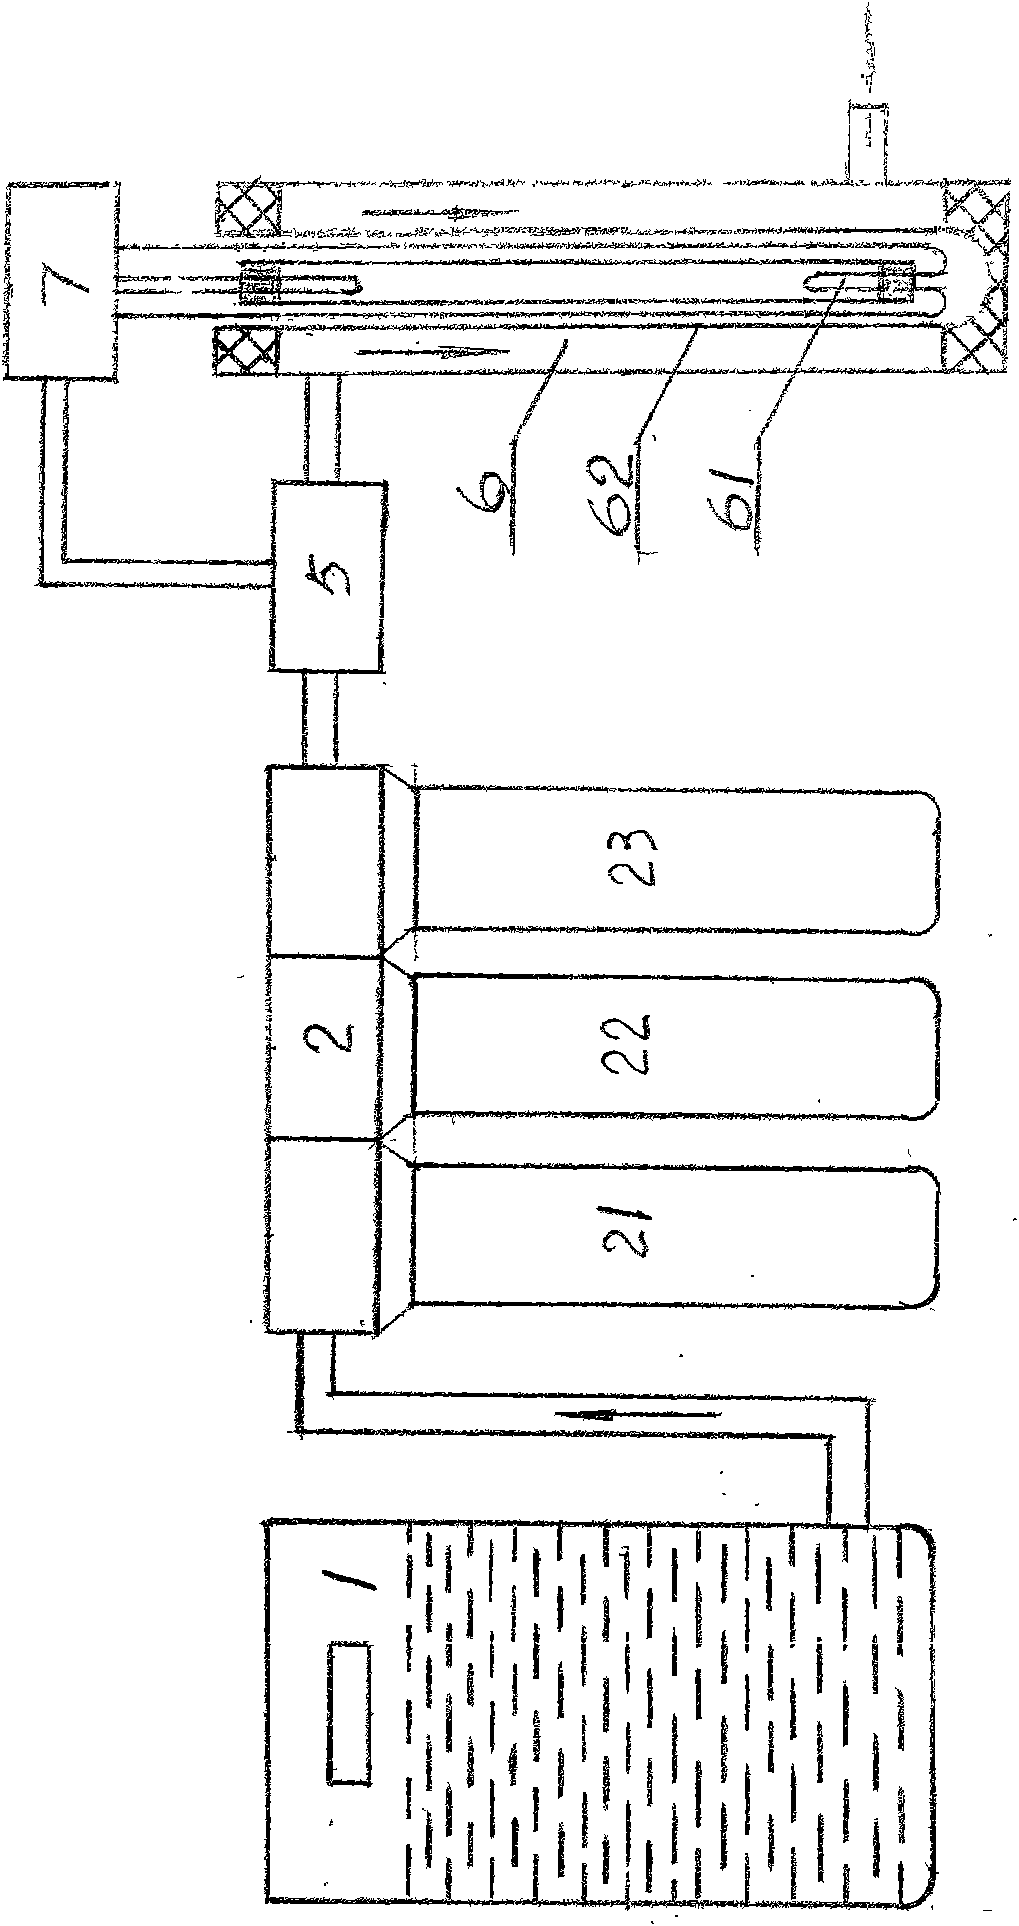 Method for filtering field water for drinking